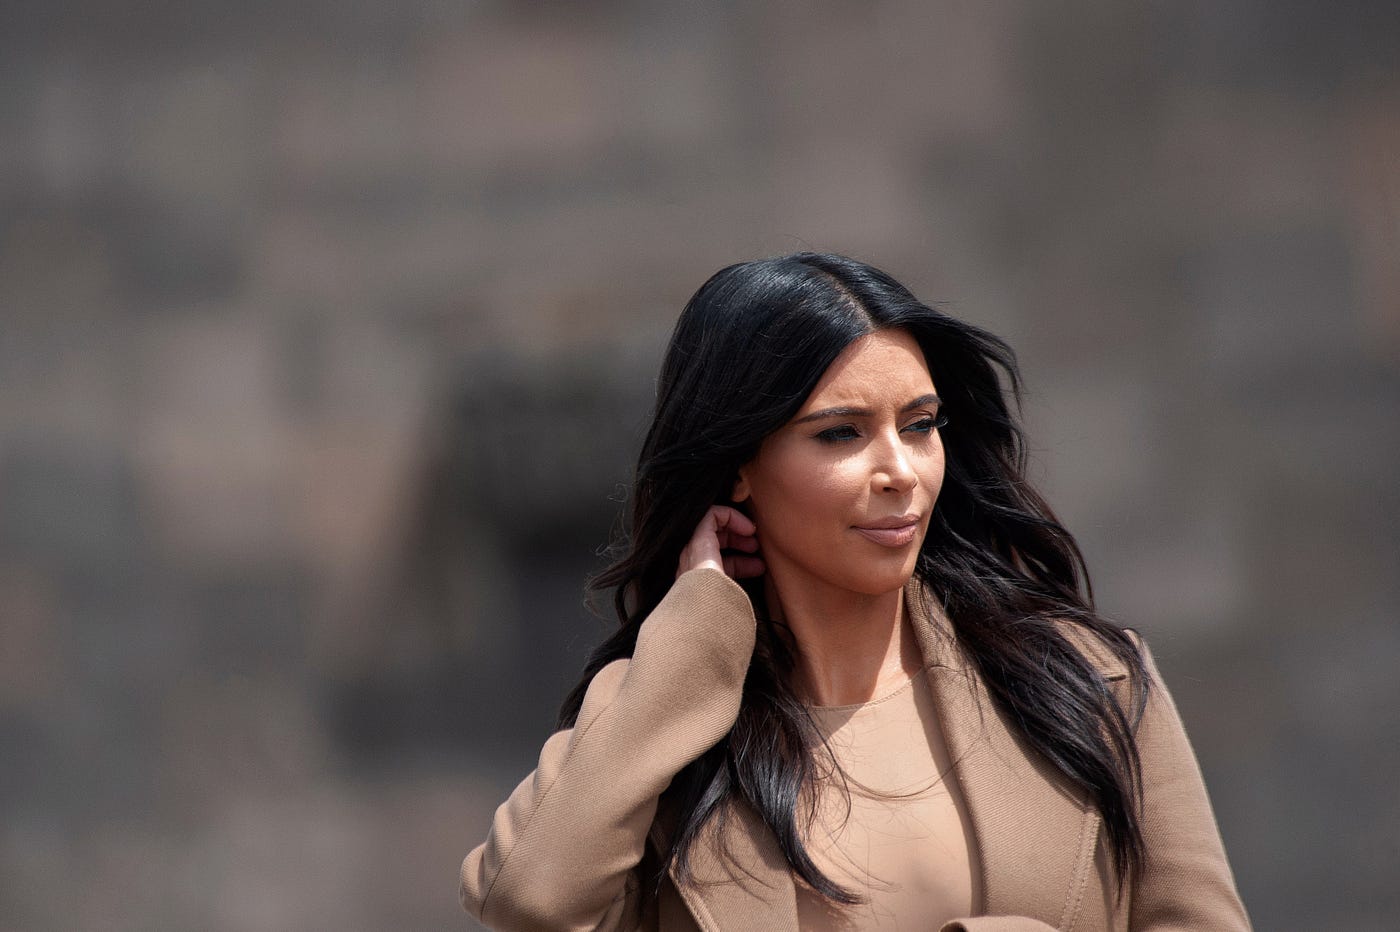 No, Kim Kardashian Selling Nipple Bras Will Not Save the Planet, by Katie  Jgln, The Noösphere